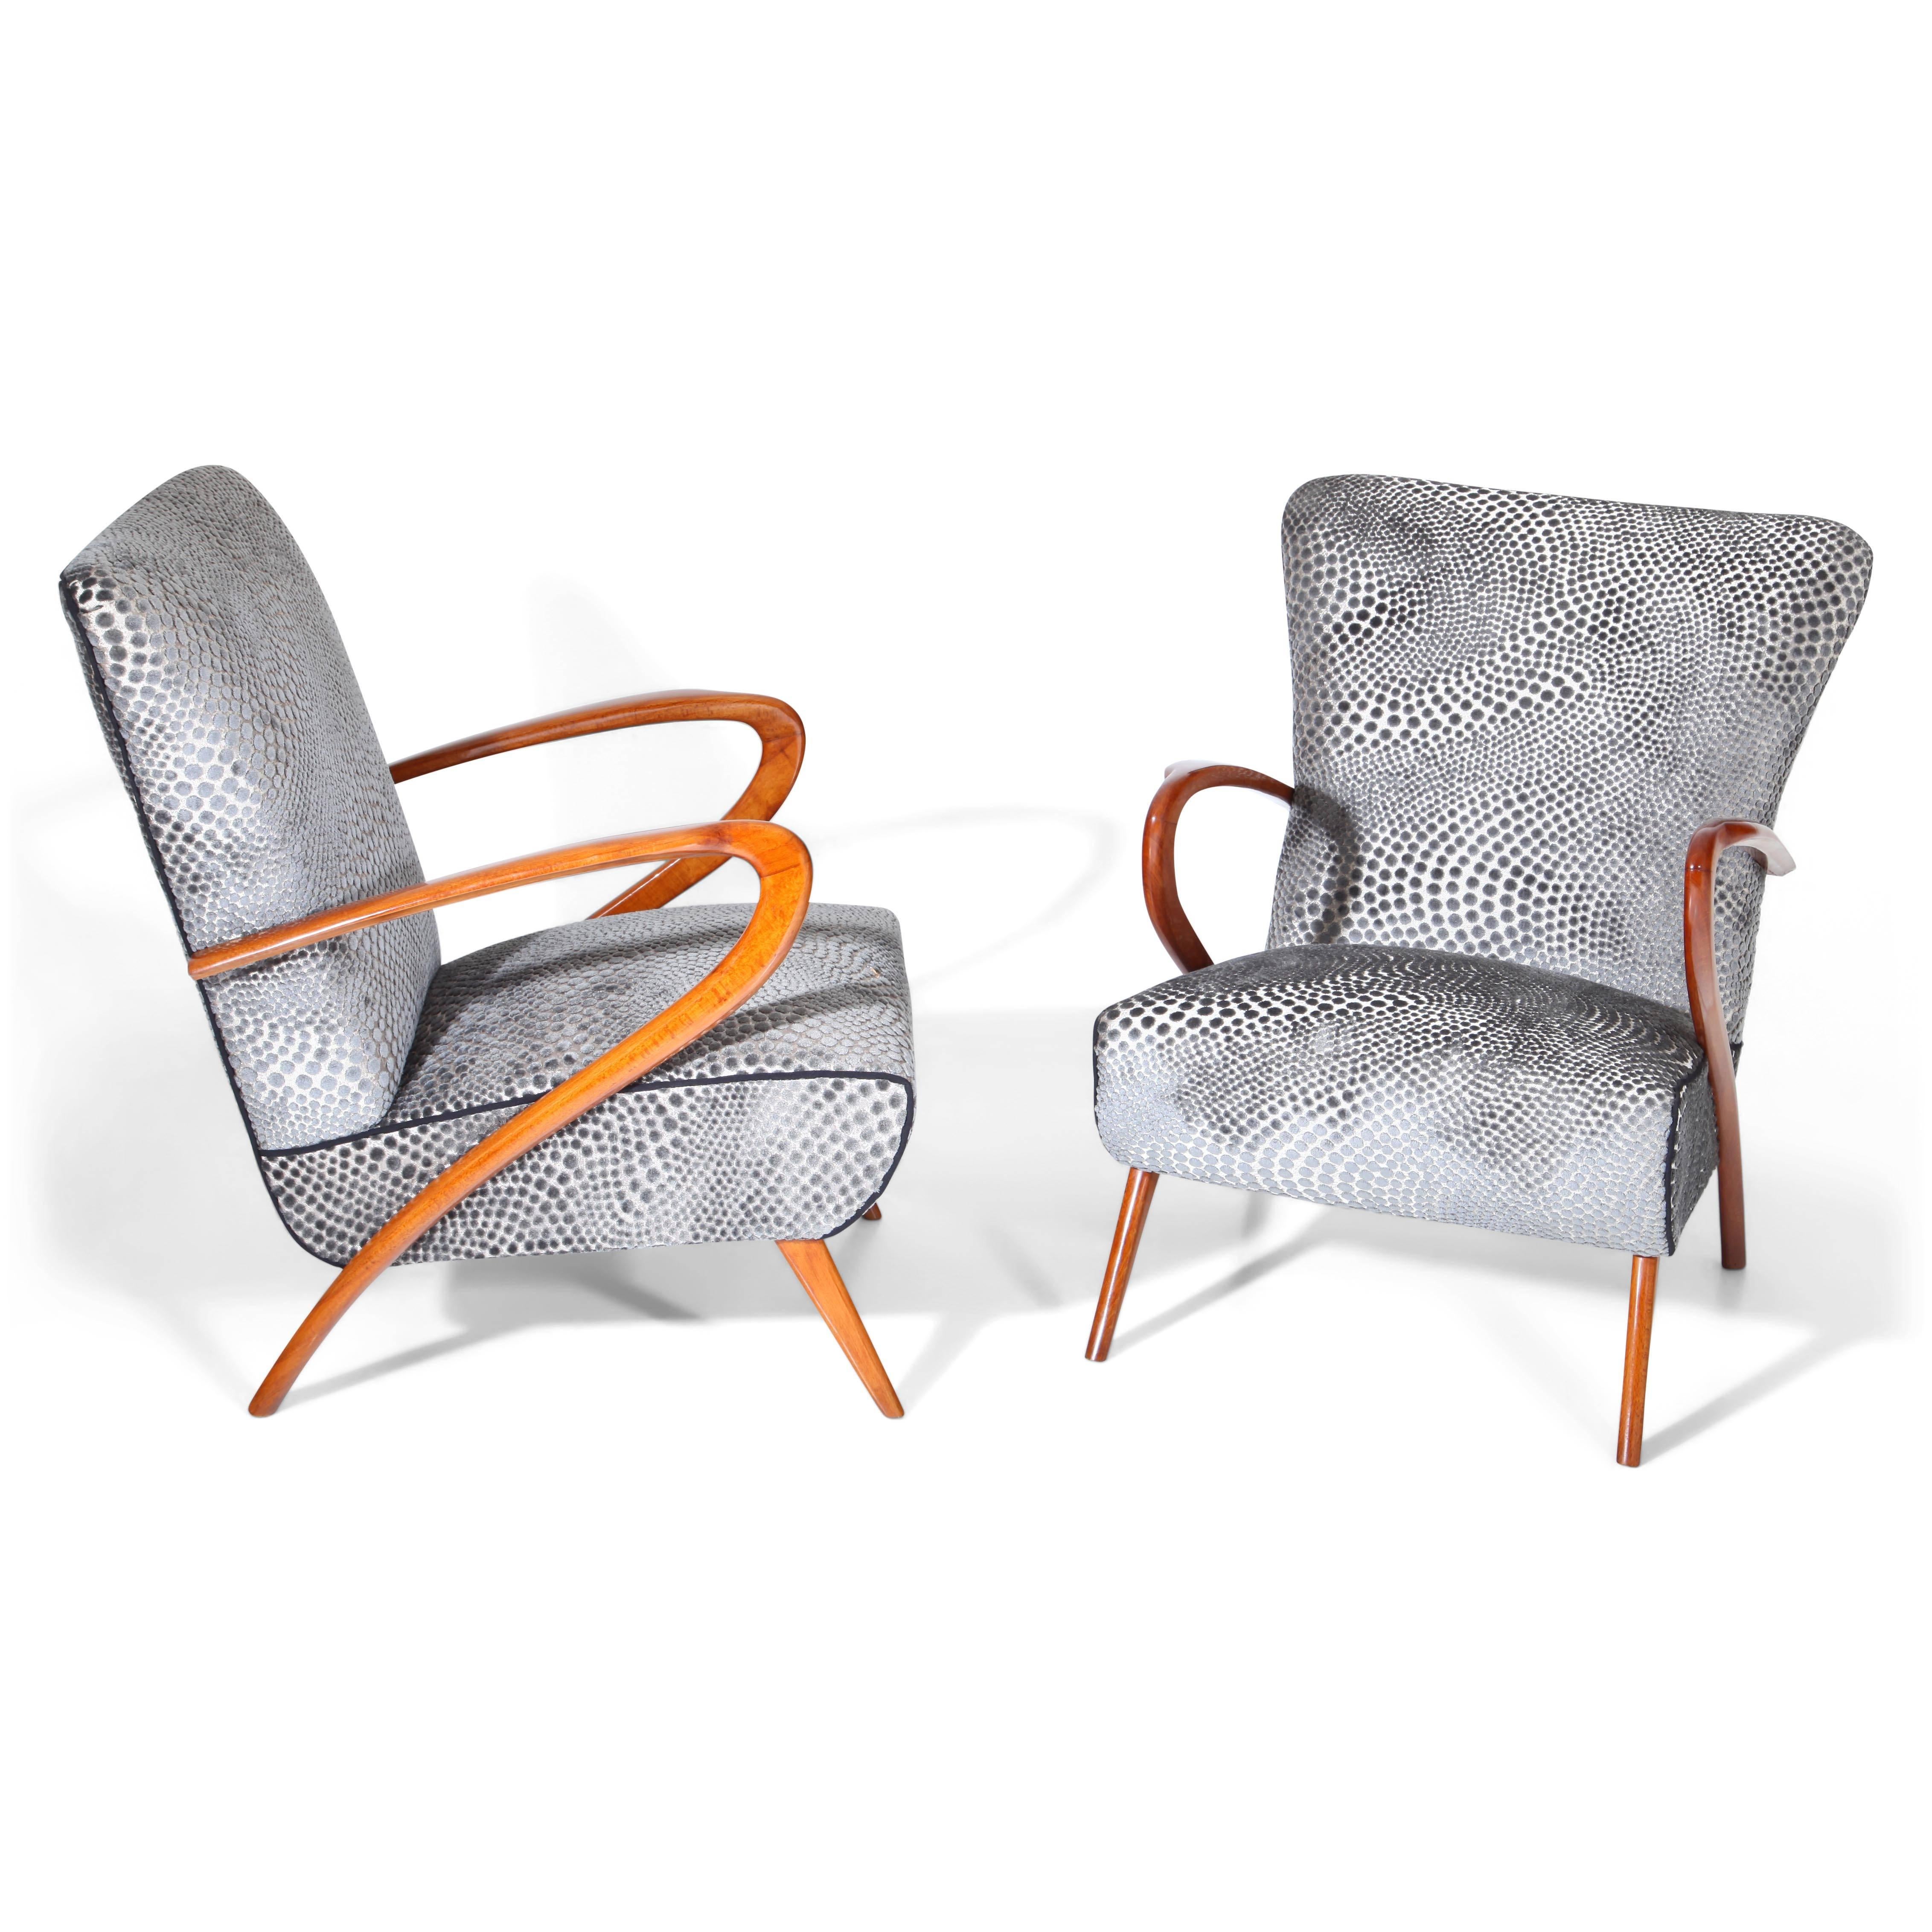 Pair of grey lounge chairs on conical legs with typically bent armrests in the style of Guglielmo Ulrich. Seat and backrest are reupholstered with a structured grey fabric.